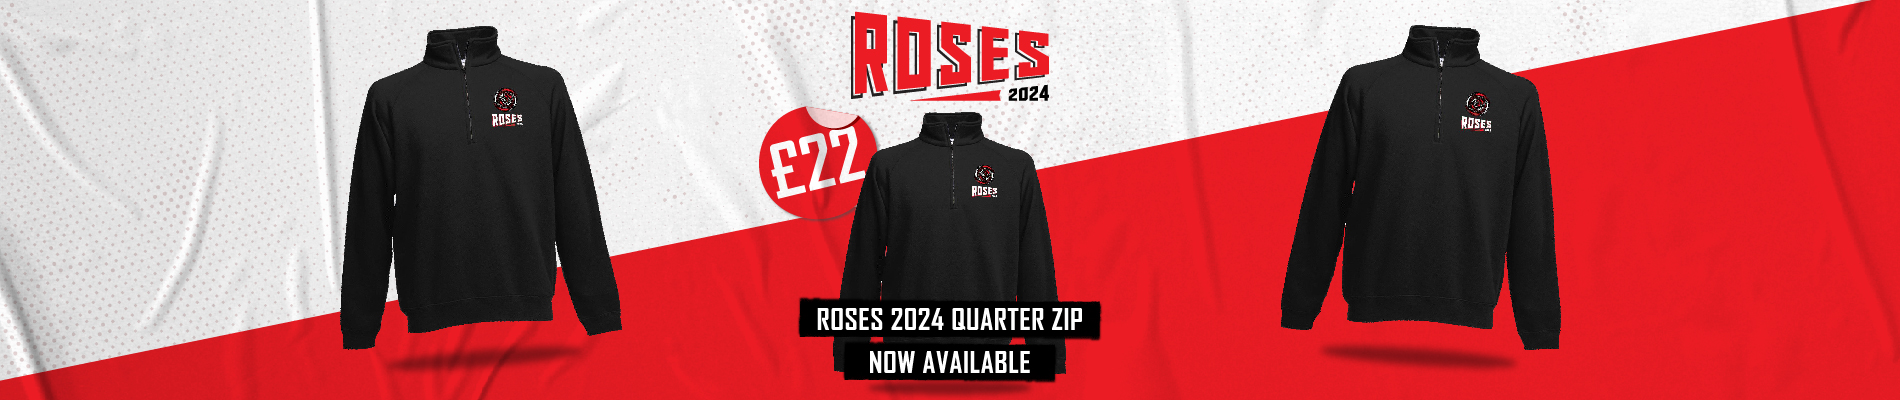 Roses Quarter Zip available now